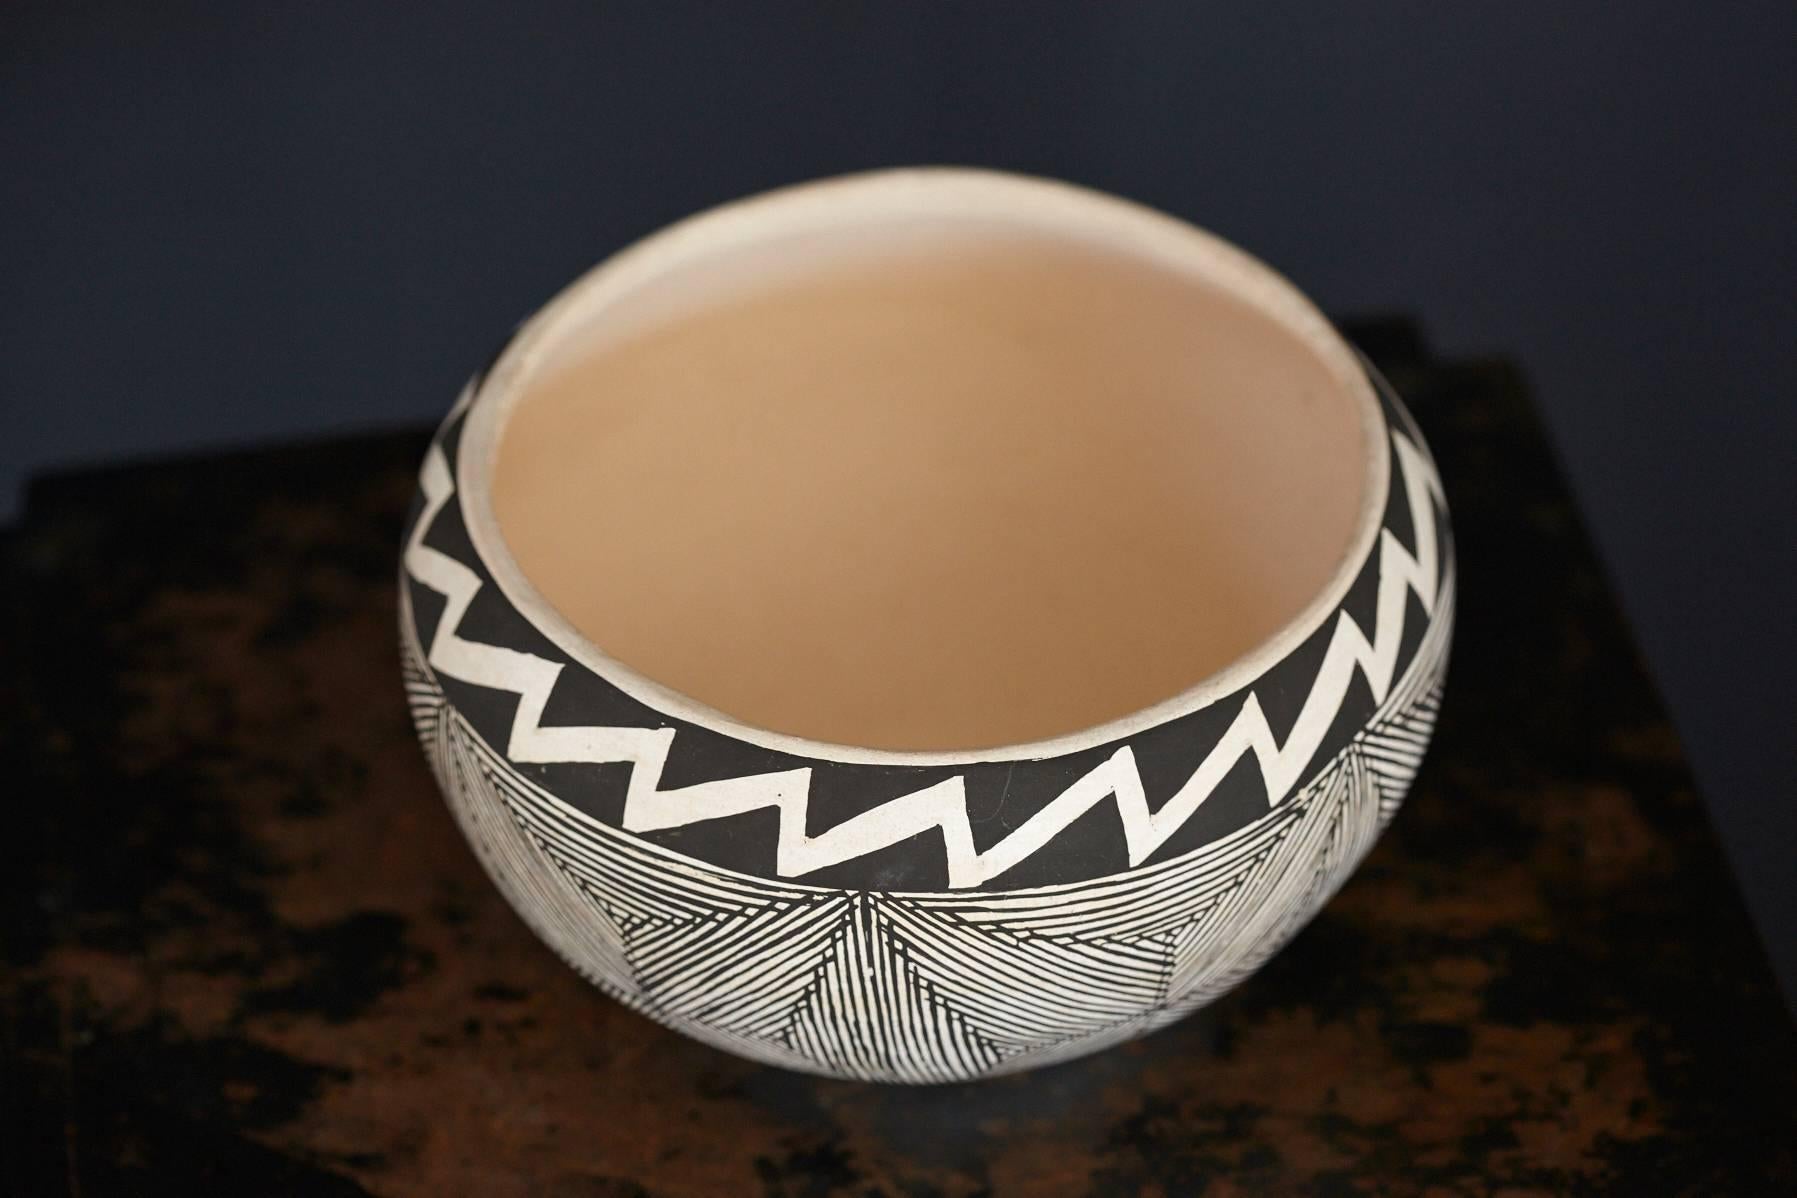 Native American Acoma Earthenware Bowl, Painted Black and White Graphic Design 2